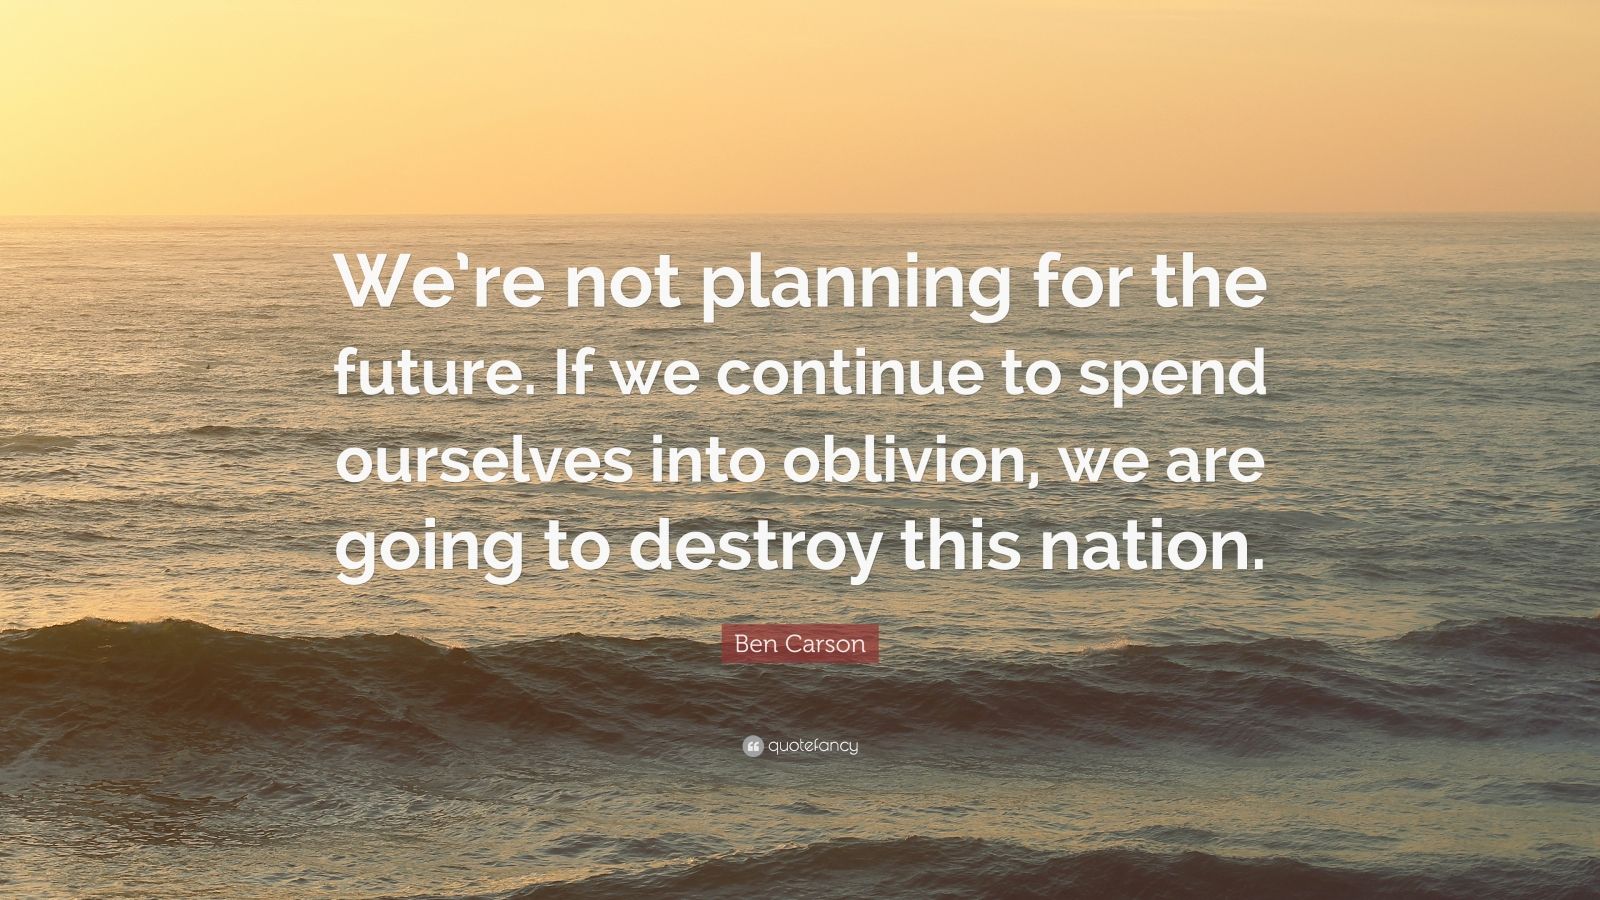 Ben Carson Quote “We’re not planning for the future. If